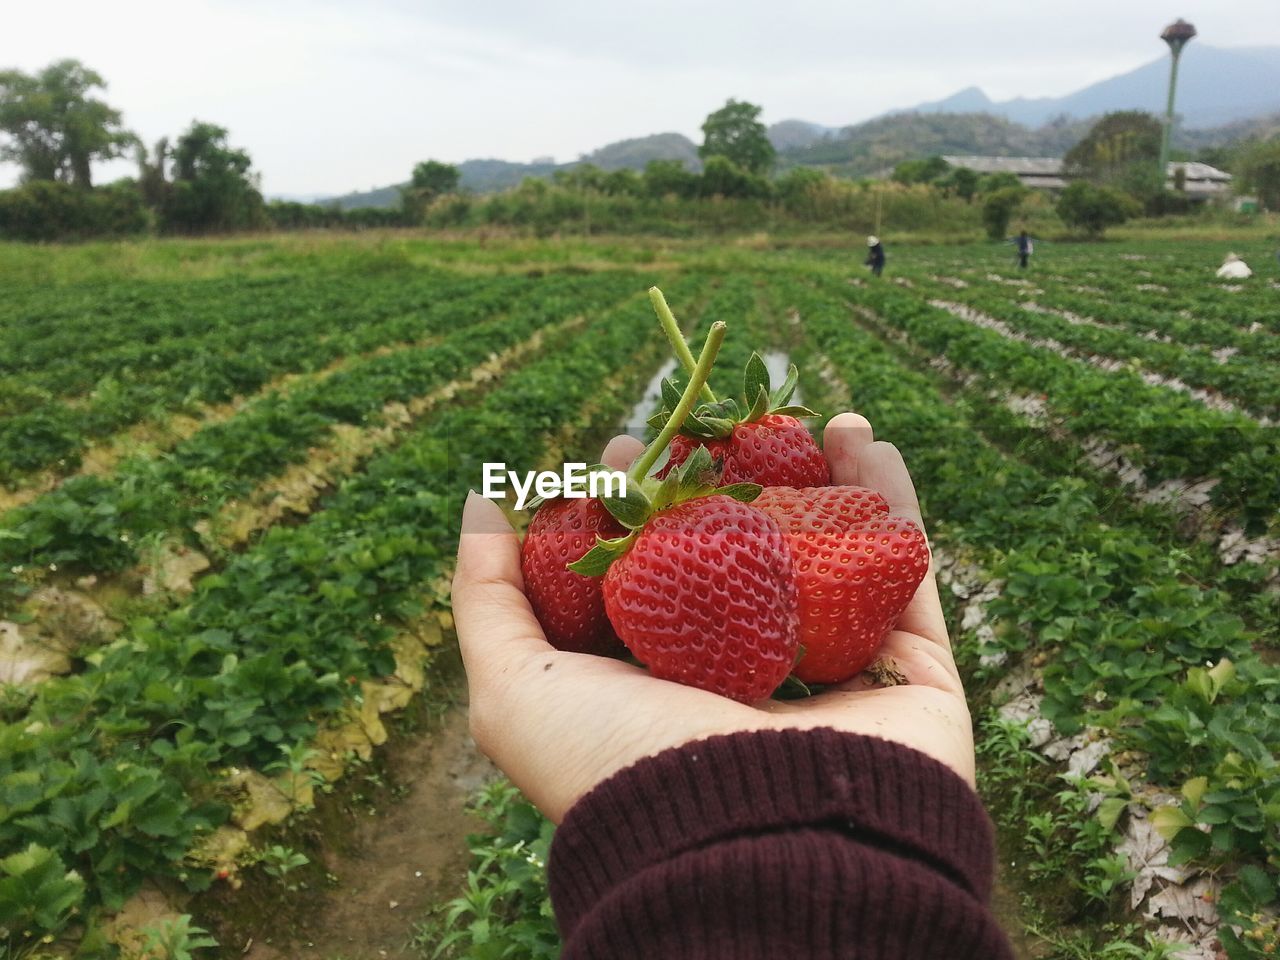 Close-up of hand holding strawberries on field